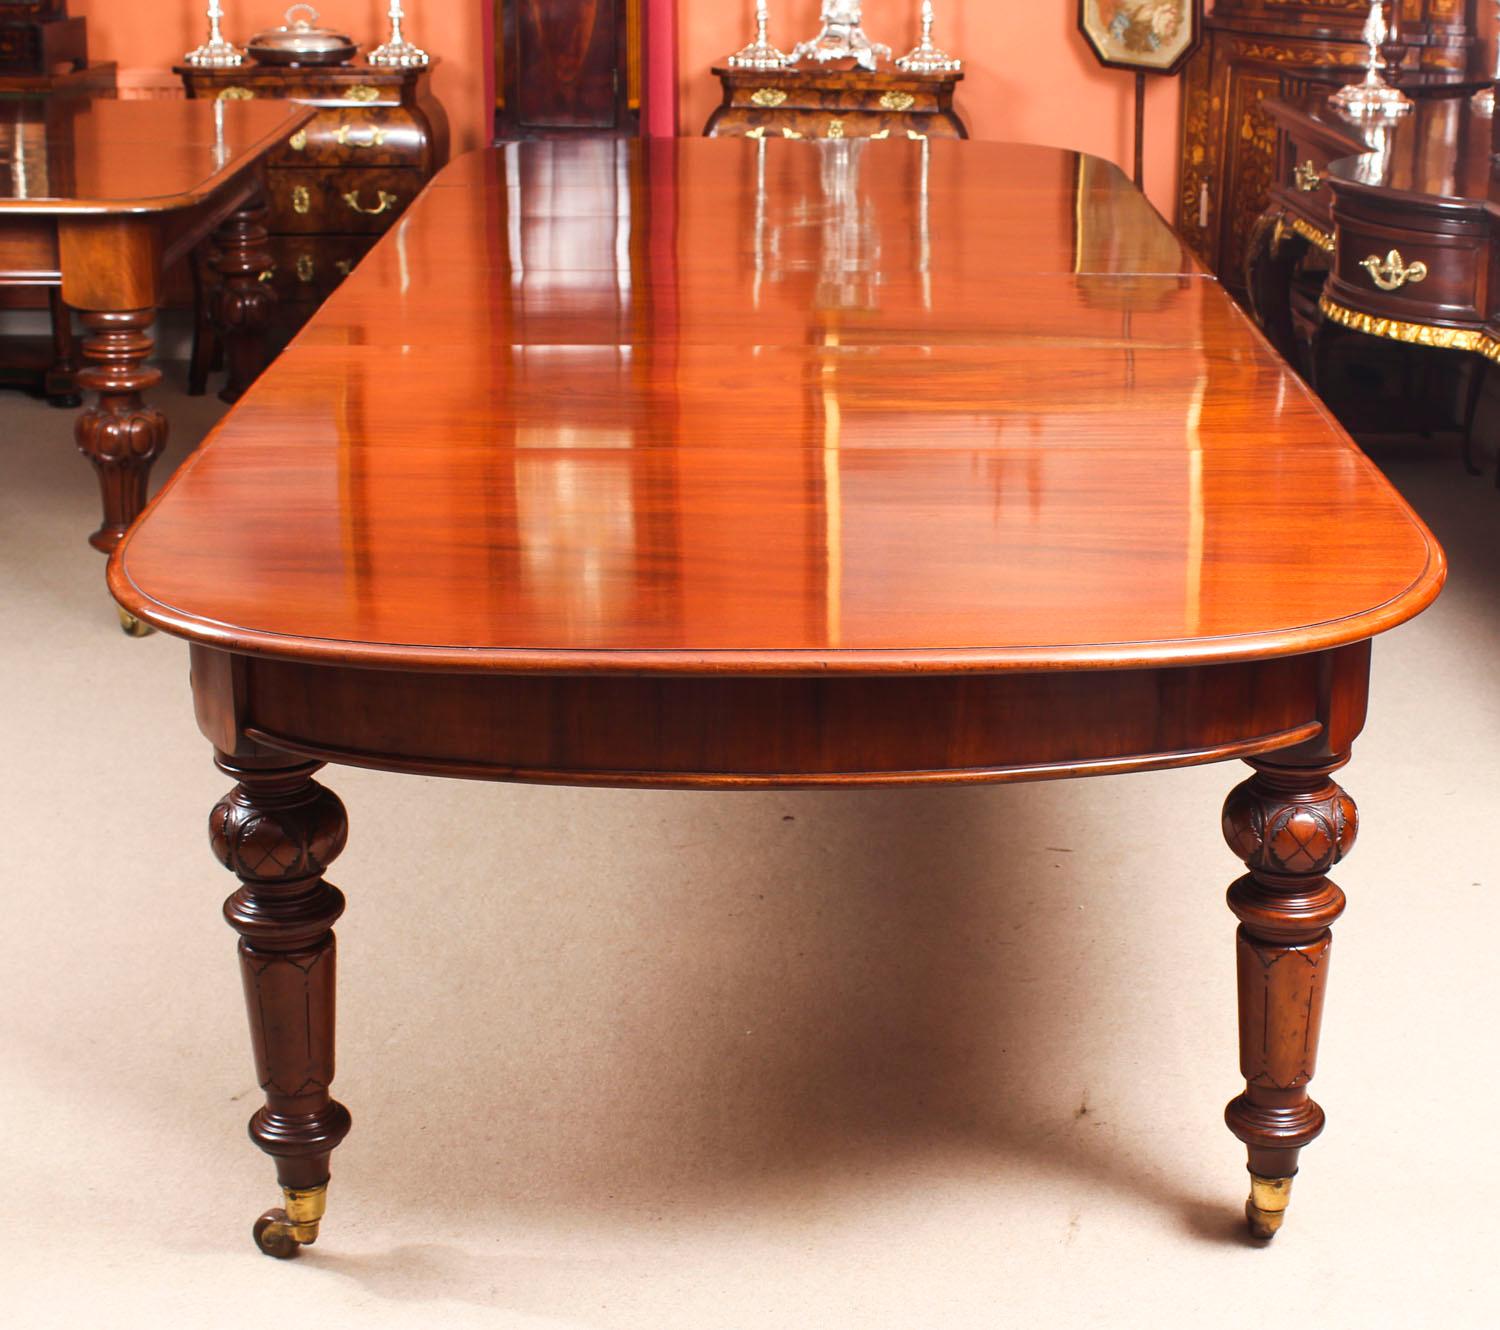 This is a magnificent antique Victorian solid mahogany D-end dining table which can seat fourteen diners in comfort and is also ideal for use as a conference table, circa 1870 in date.
 
This beautiful table is in stunning flame mahogany and has